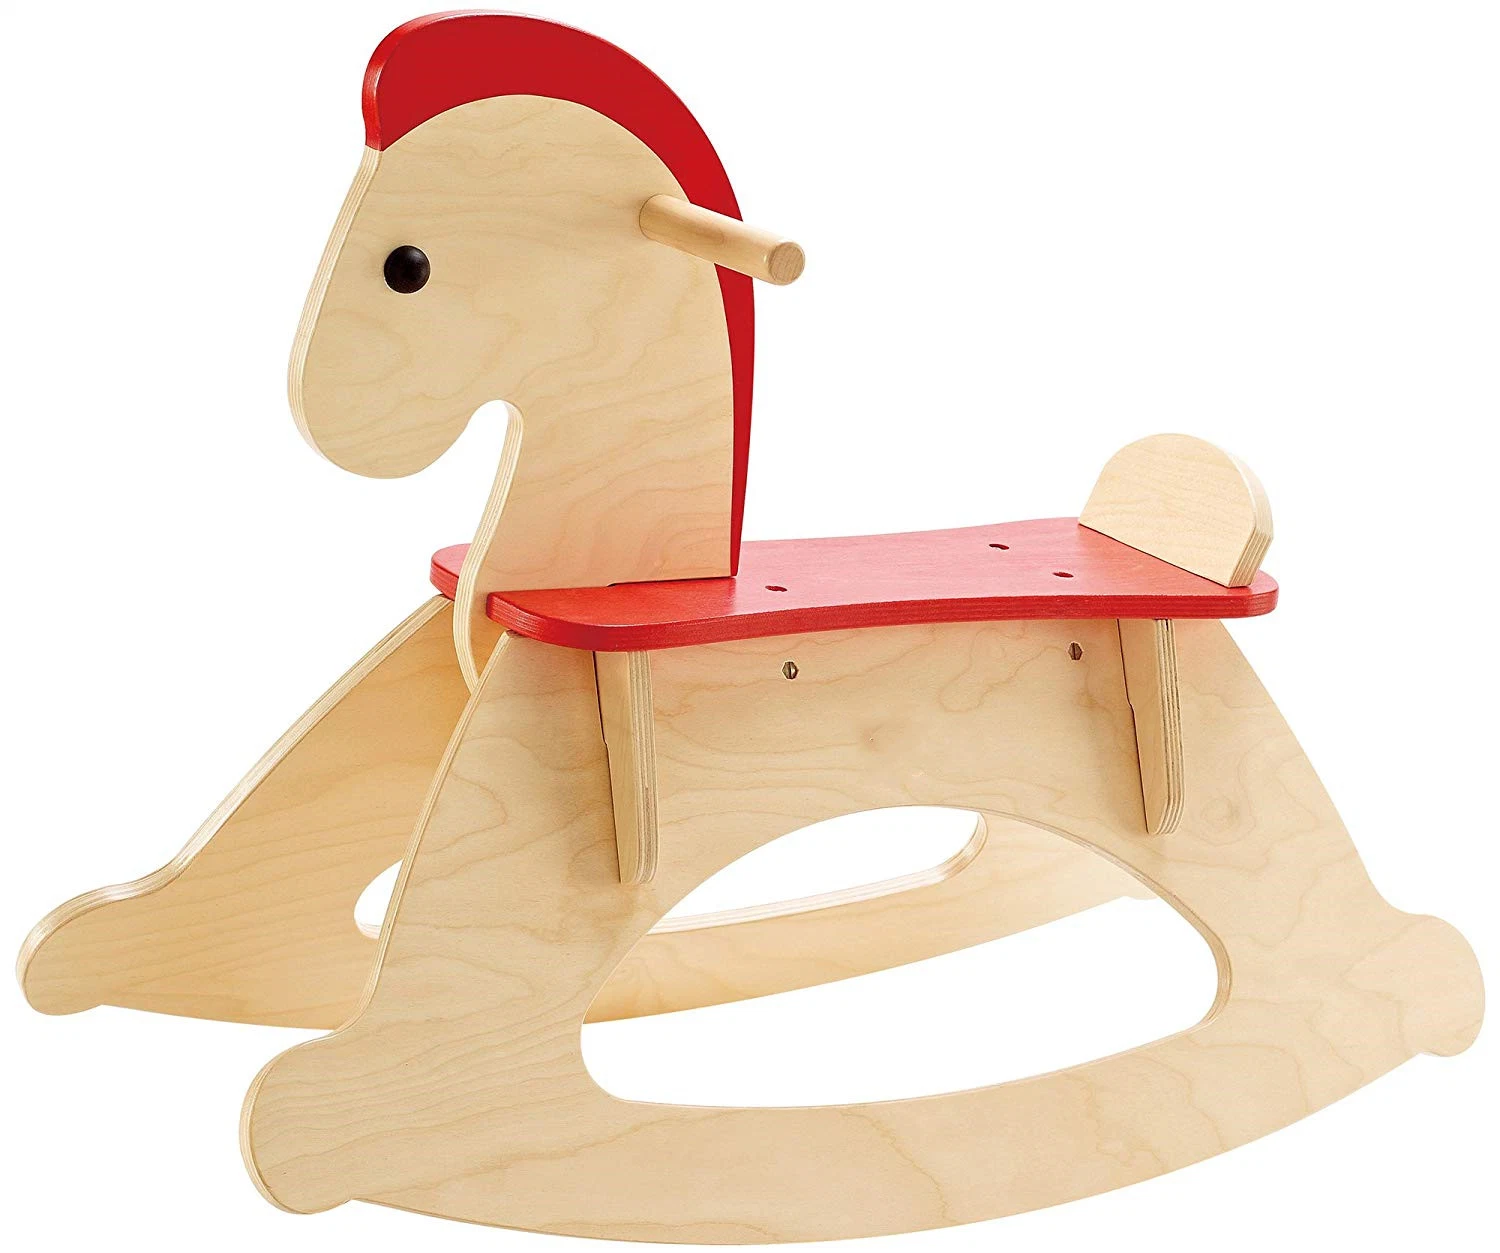 Kid's Wooden Rocking Horse Rock and Ride Wooden Educational Toy